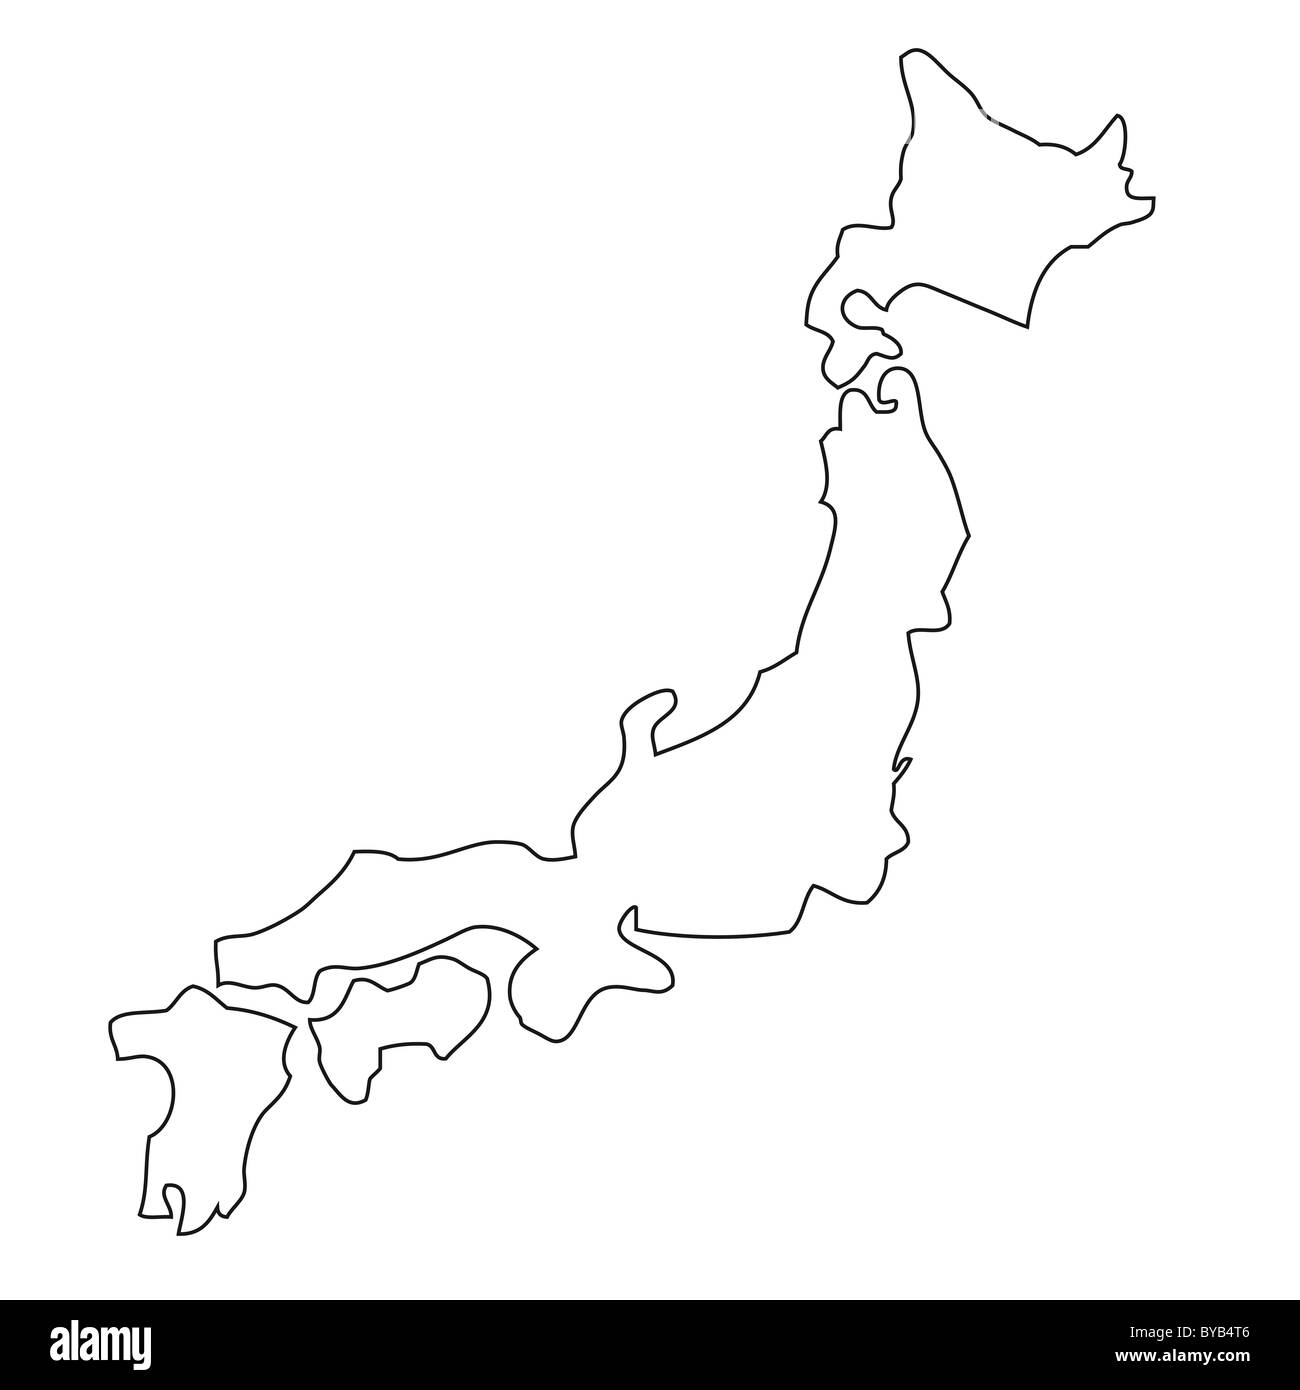 Outline Map Japan High Resolution Stock Photography and Images - Alamy